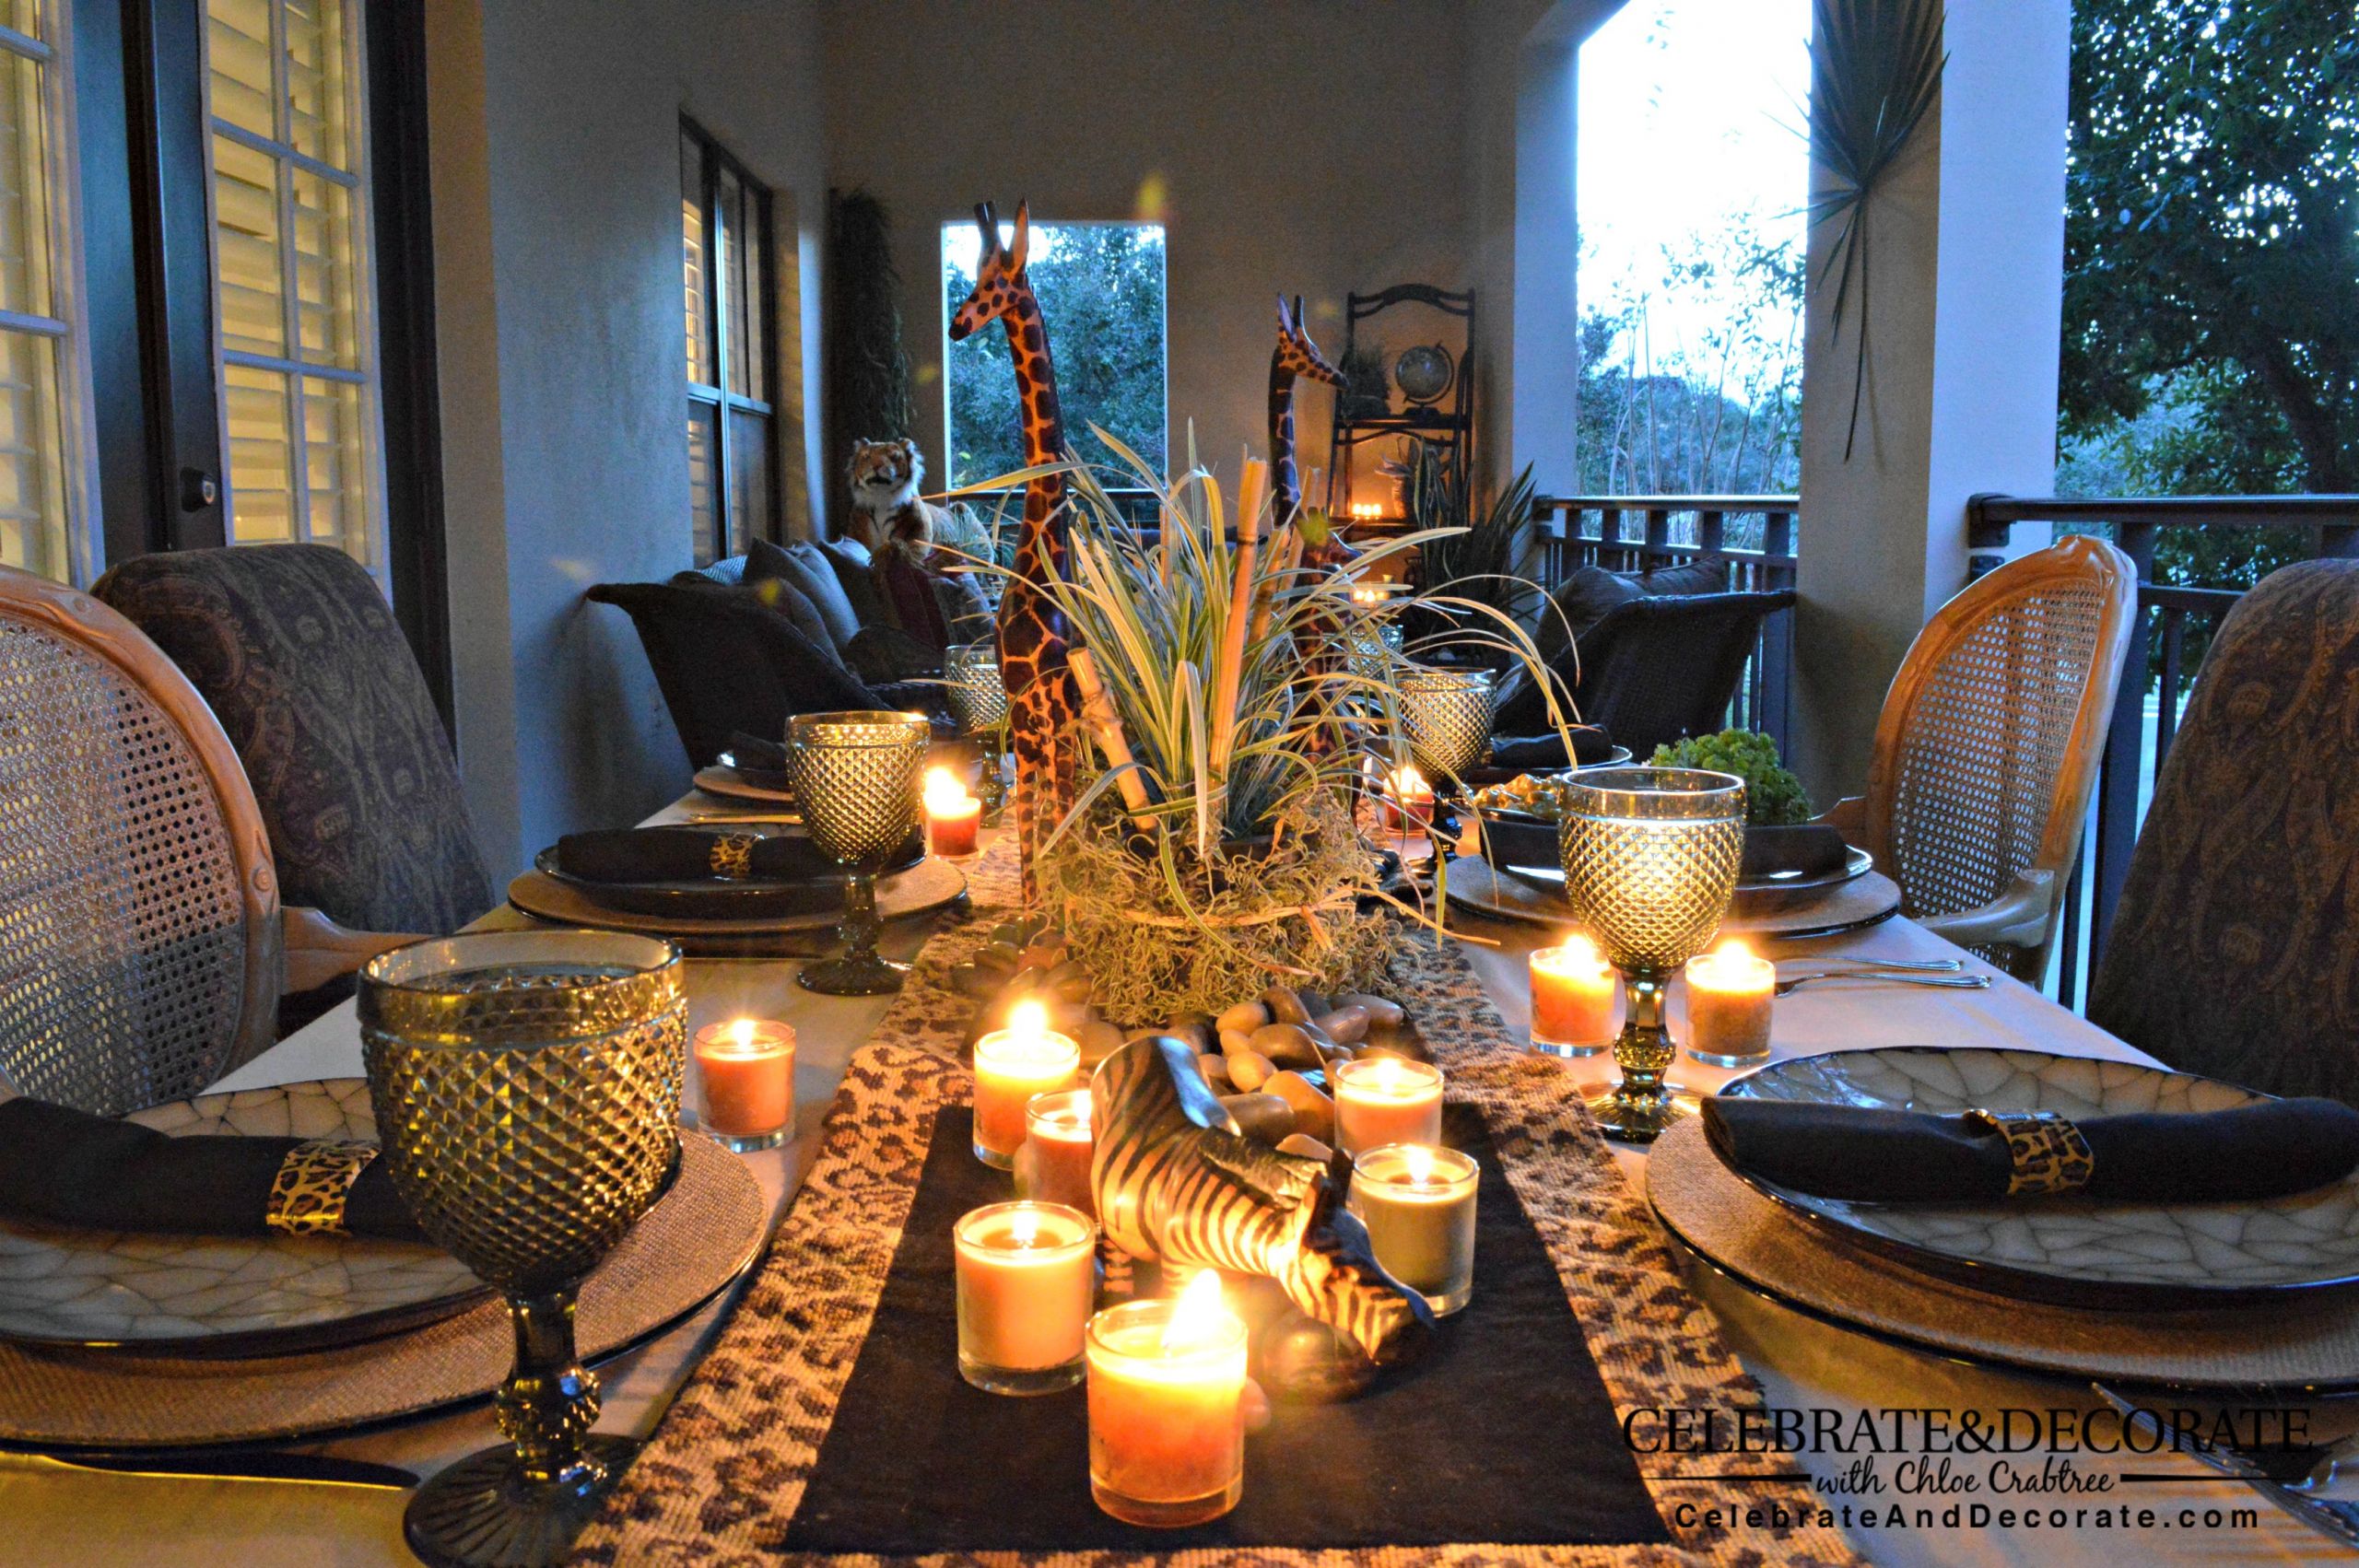 Themed Dinner Party Ideas
 Safari Party or Jungle party perfect for an outdoor summer